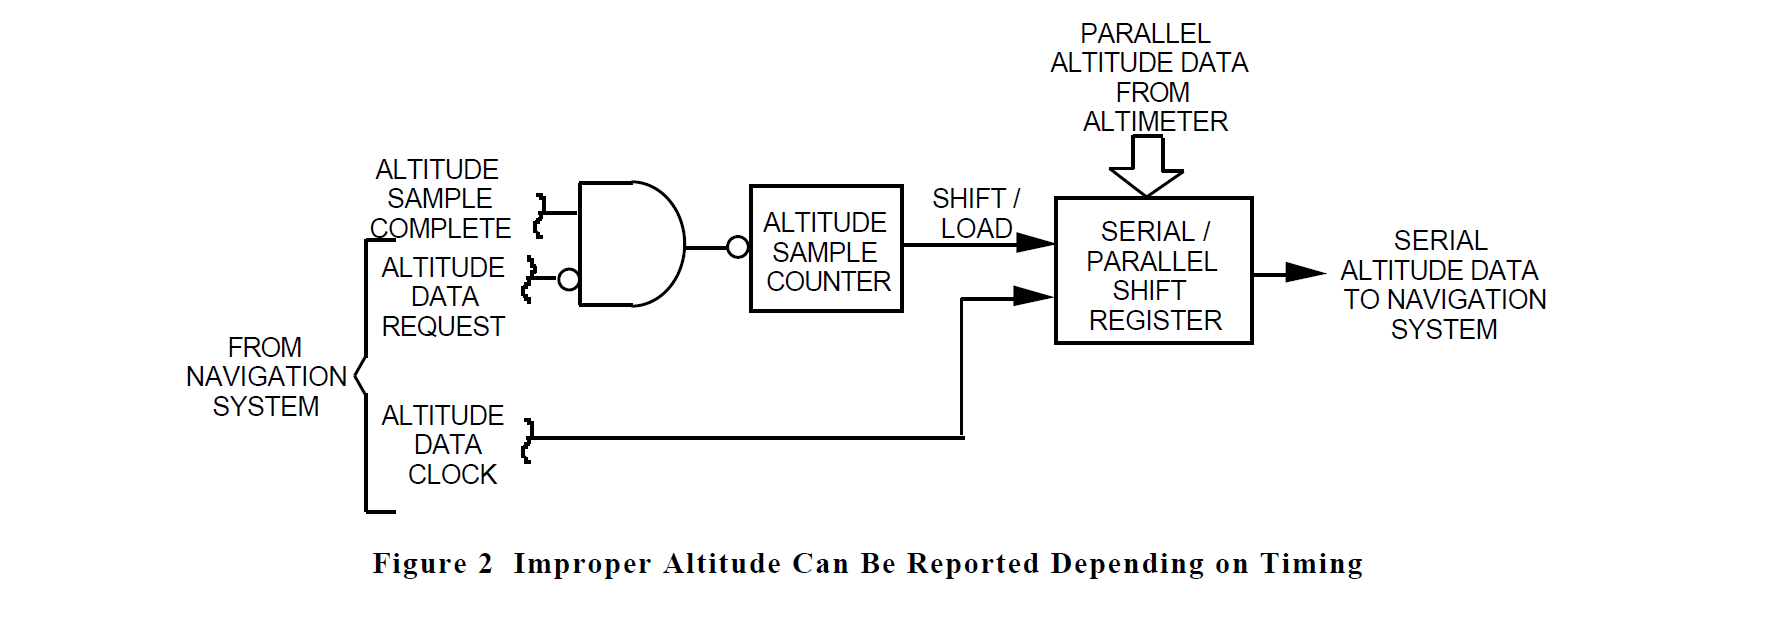 IDA Inc - Improper Altitude Can Be Reported Depending on Timing